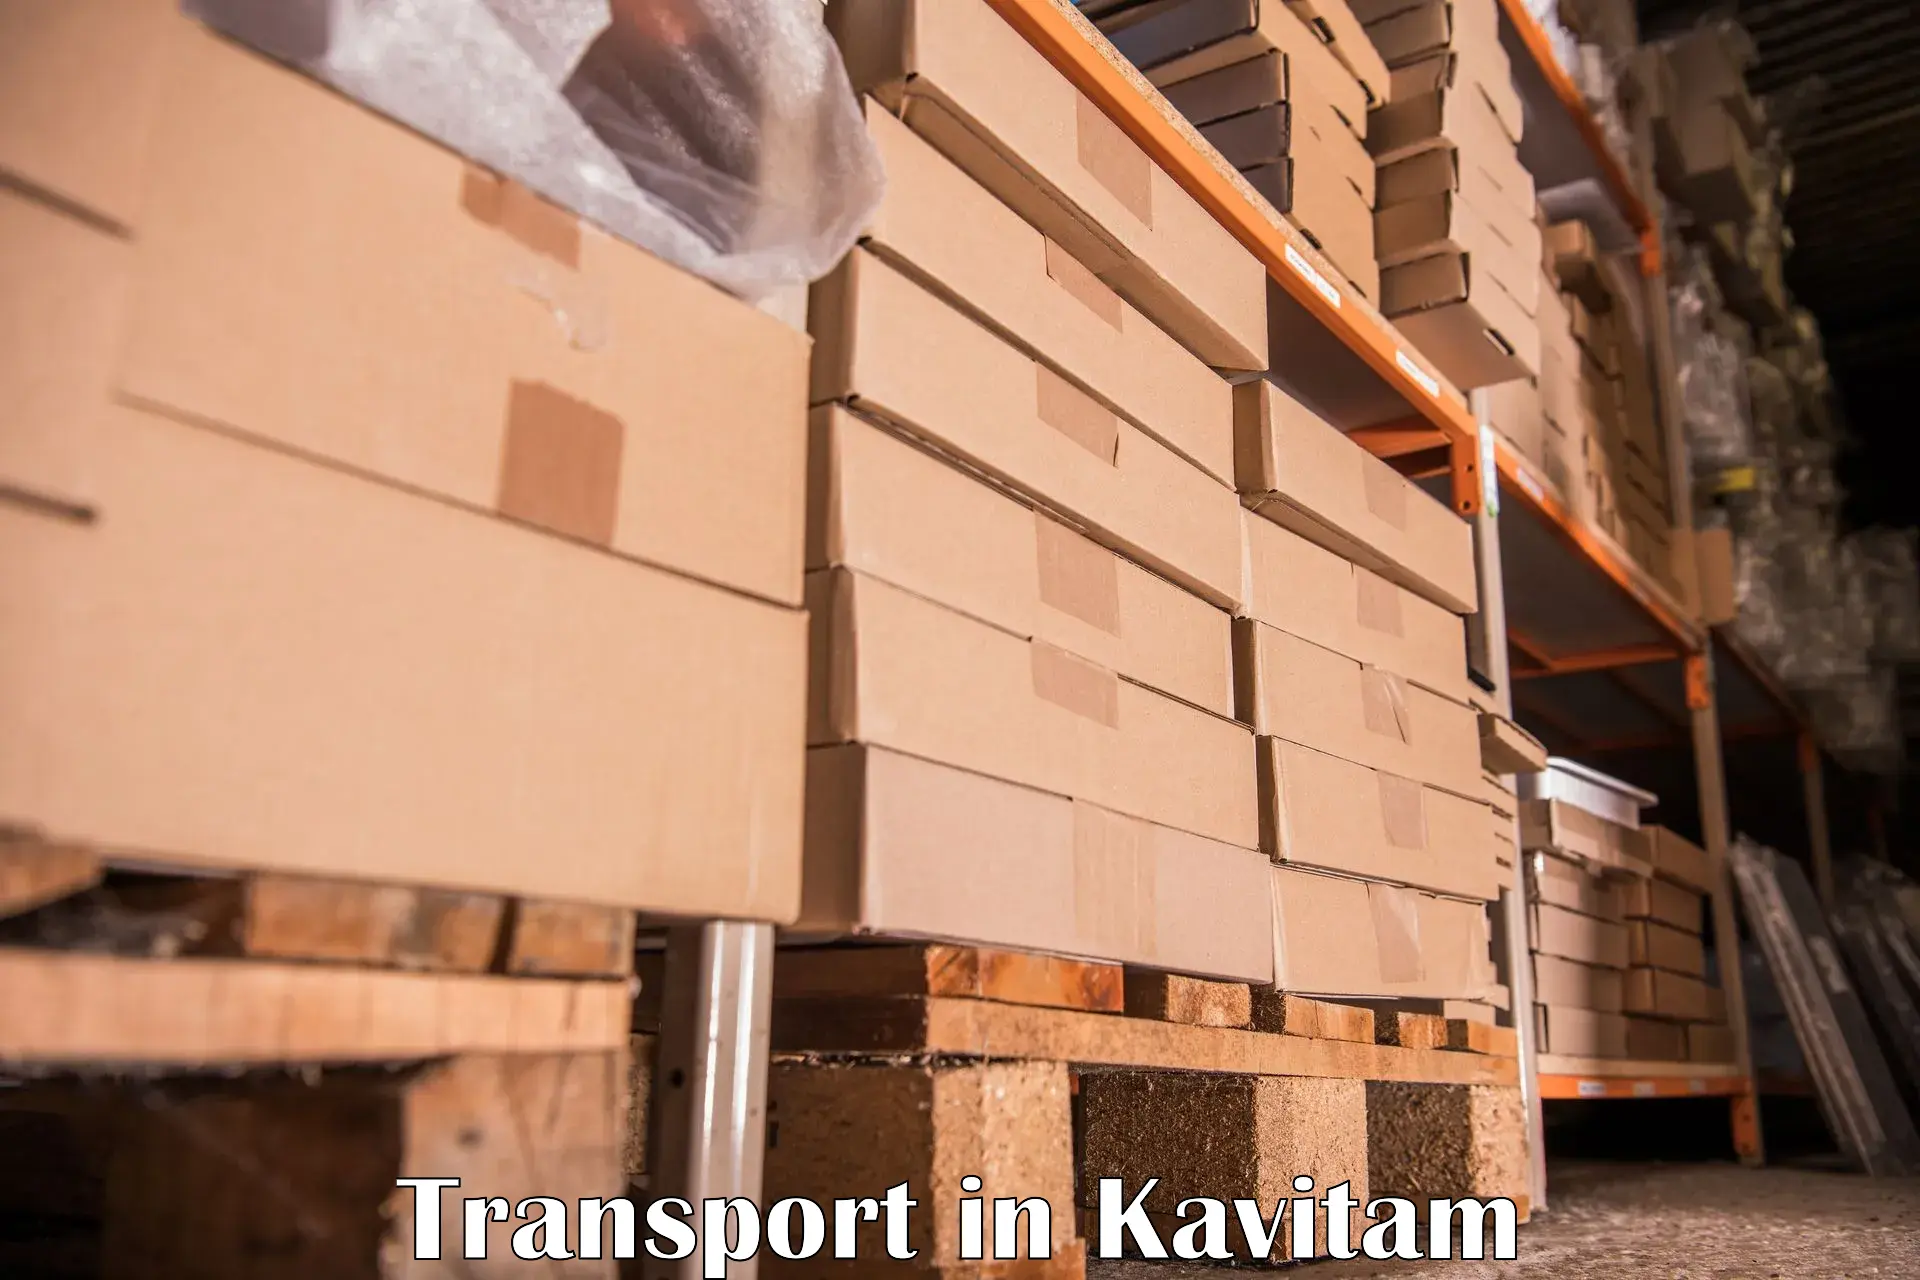 Vehicle transport services in Kavitam